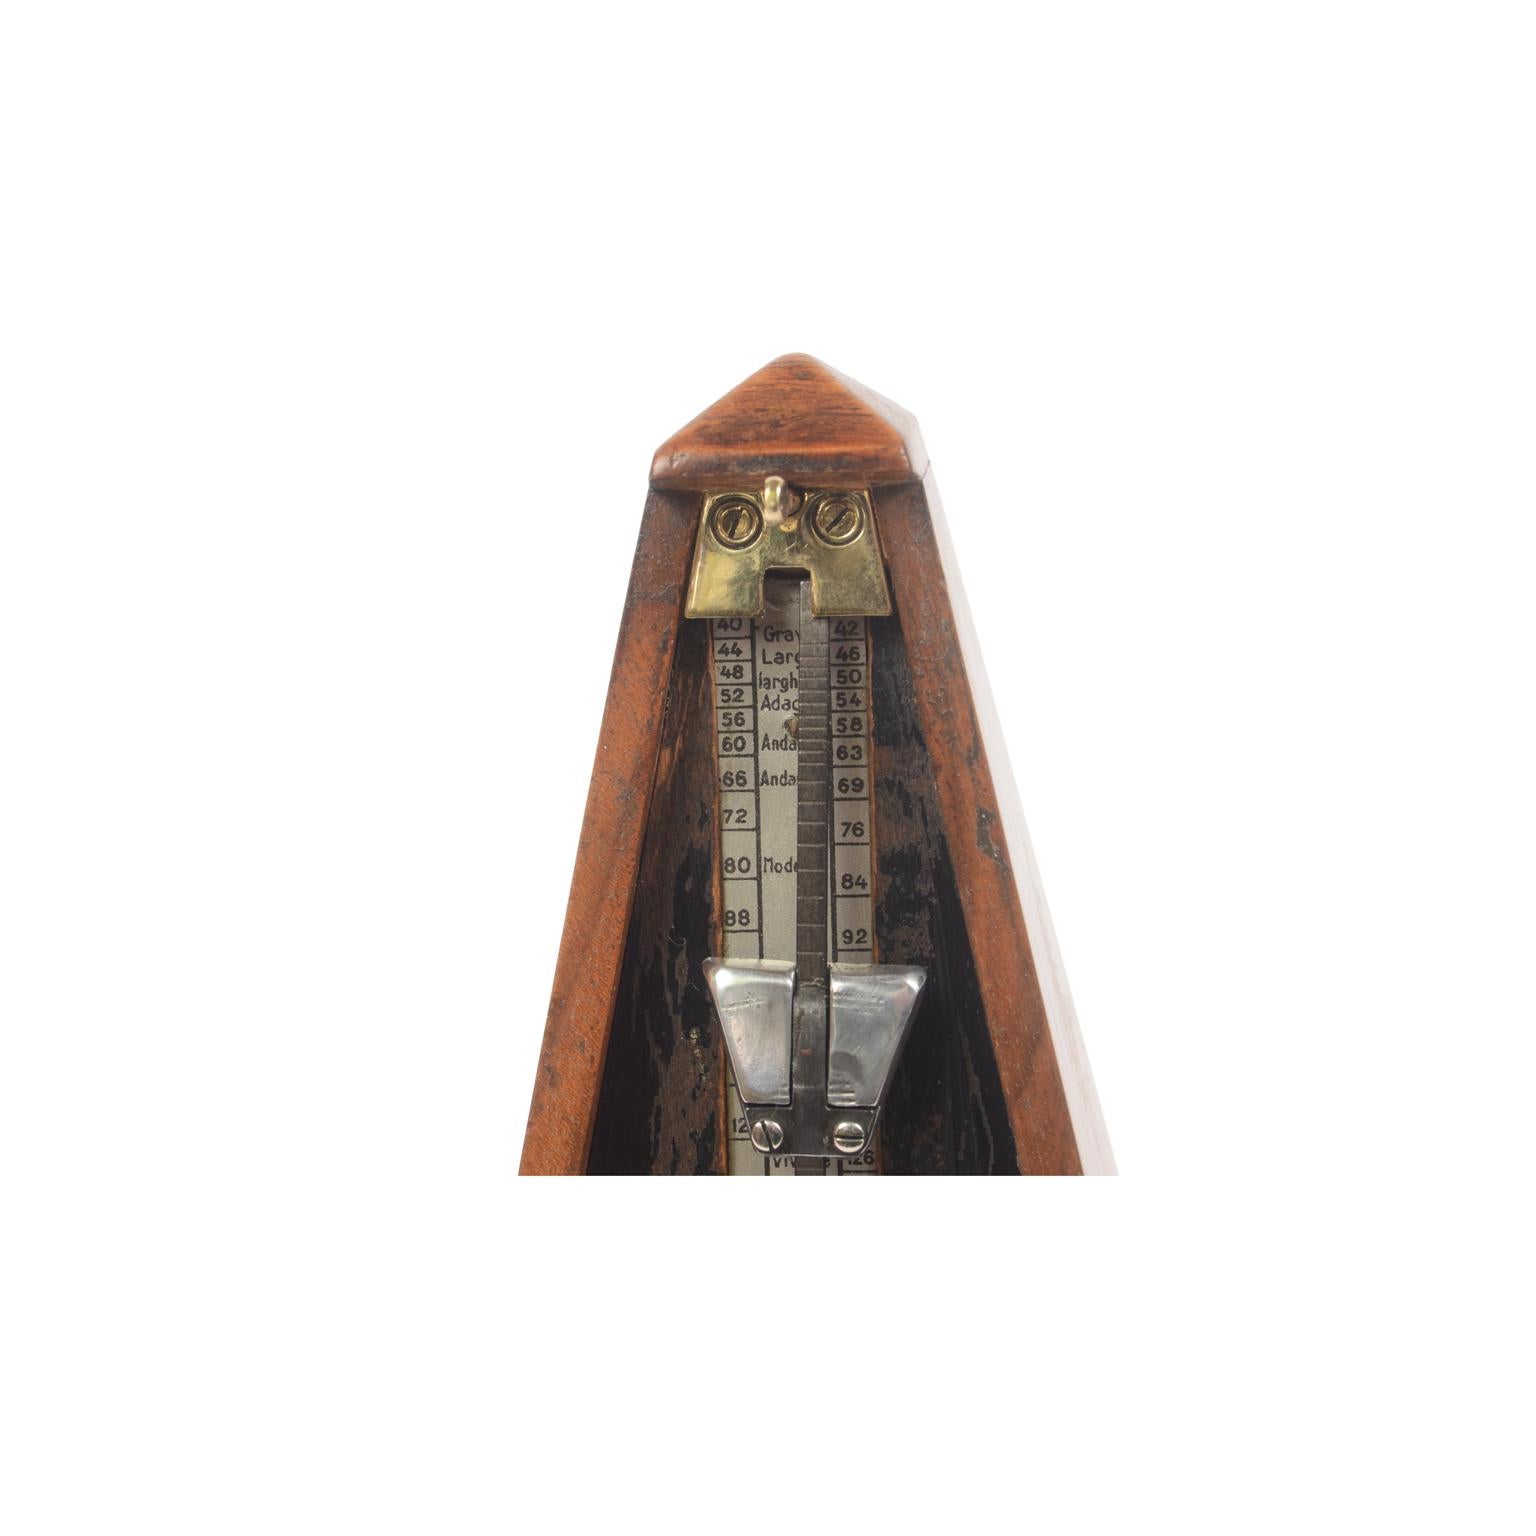 French Metronome System Paquet 1815 and Johan Maelzel 1846